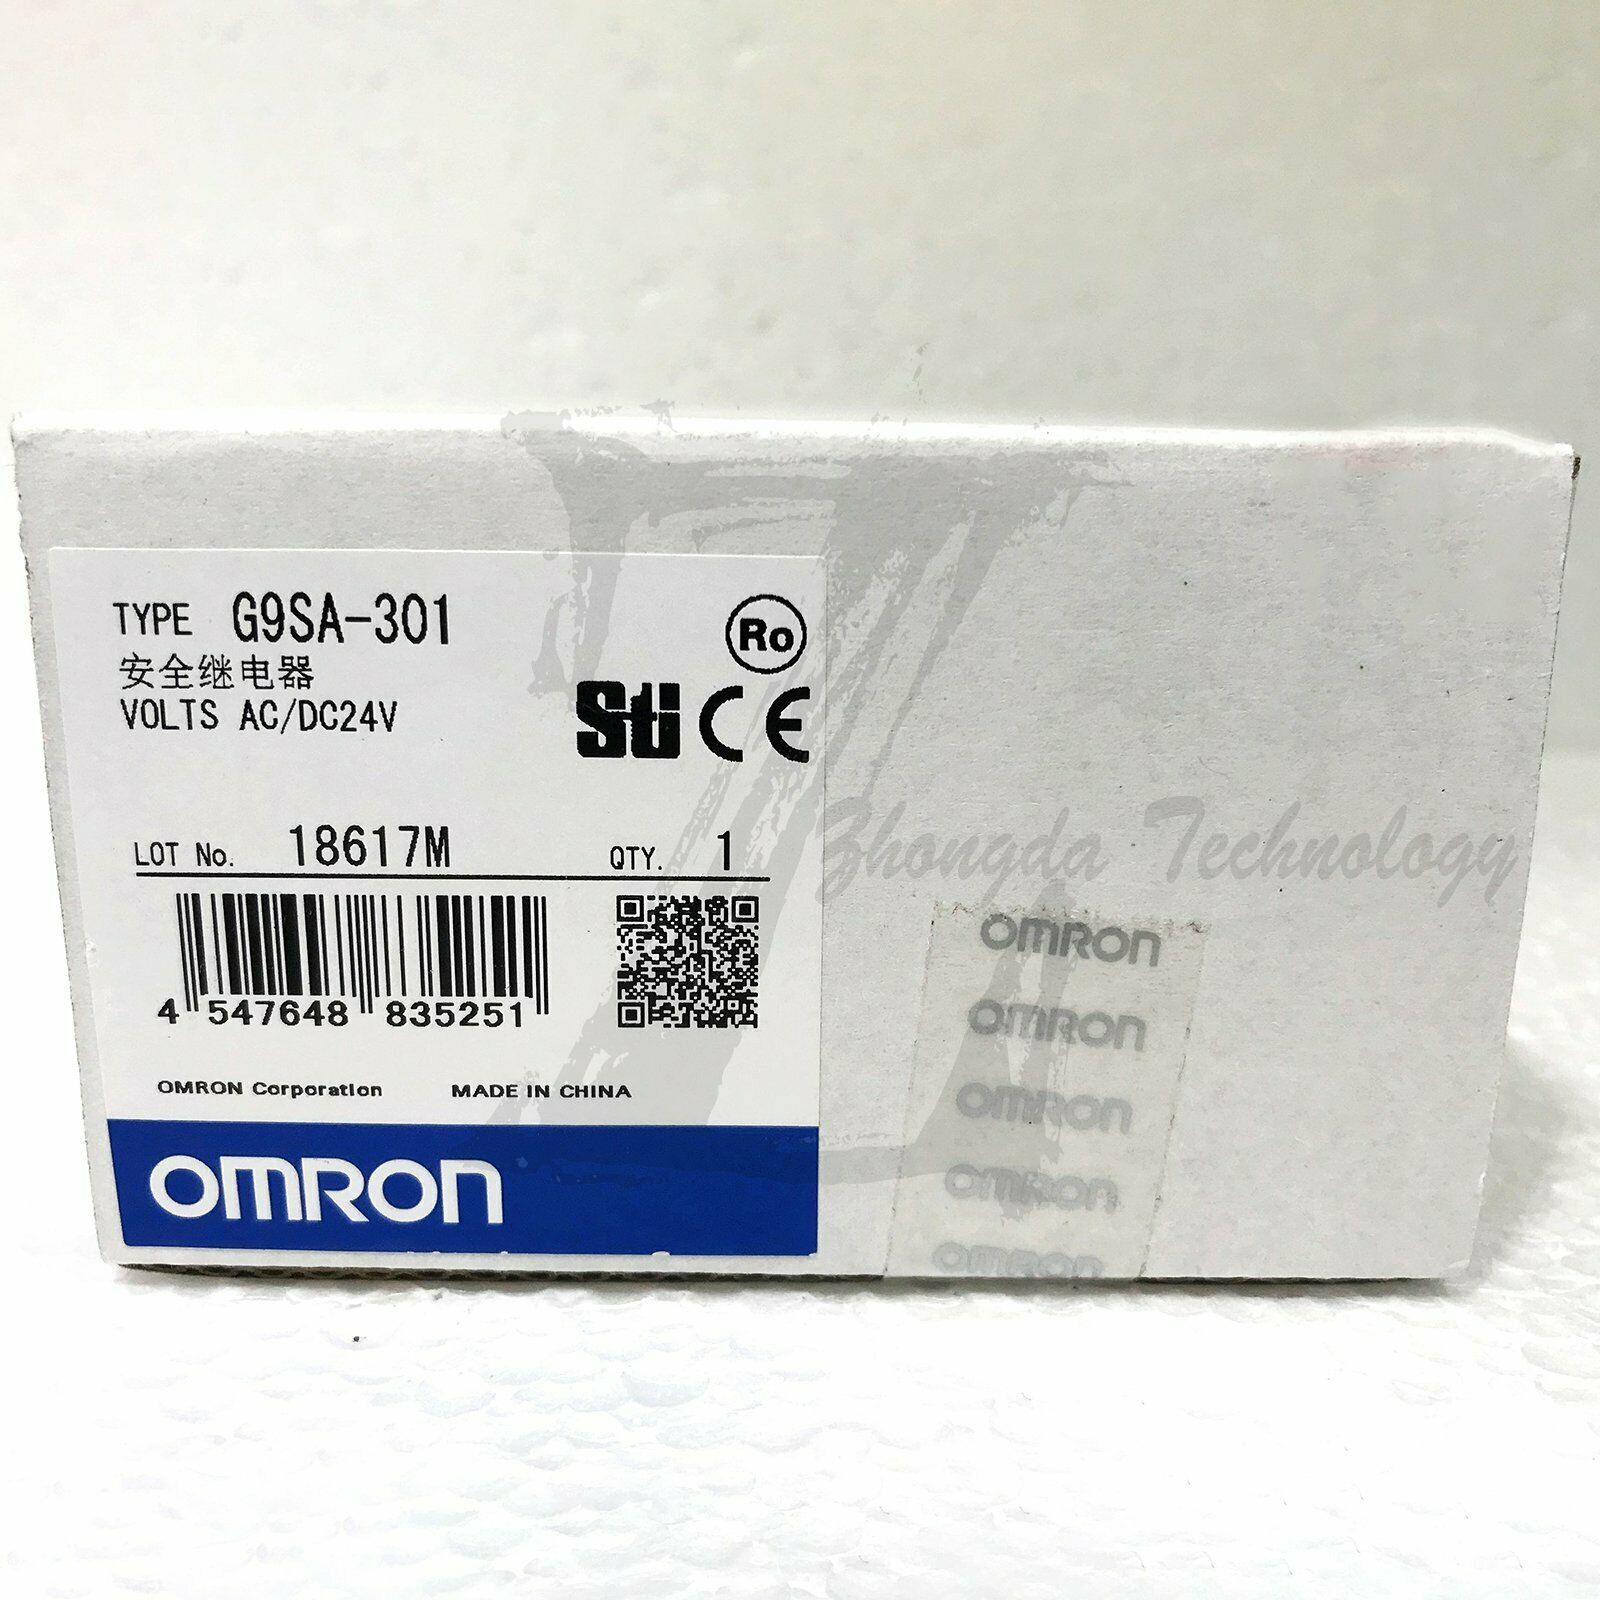 1pc new Omron safety relay G9SA-301 one year warranty KOEED 101-200, 90%, import_2020_10_10_031751, Omron, Other